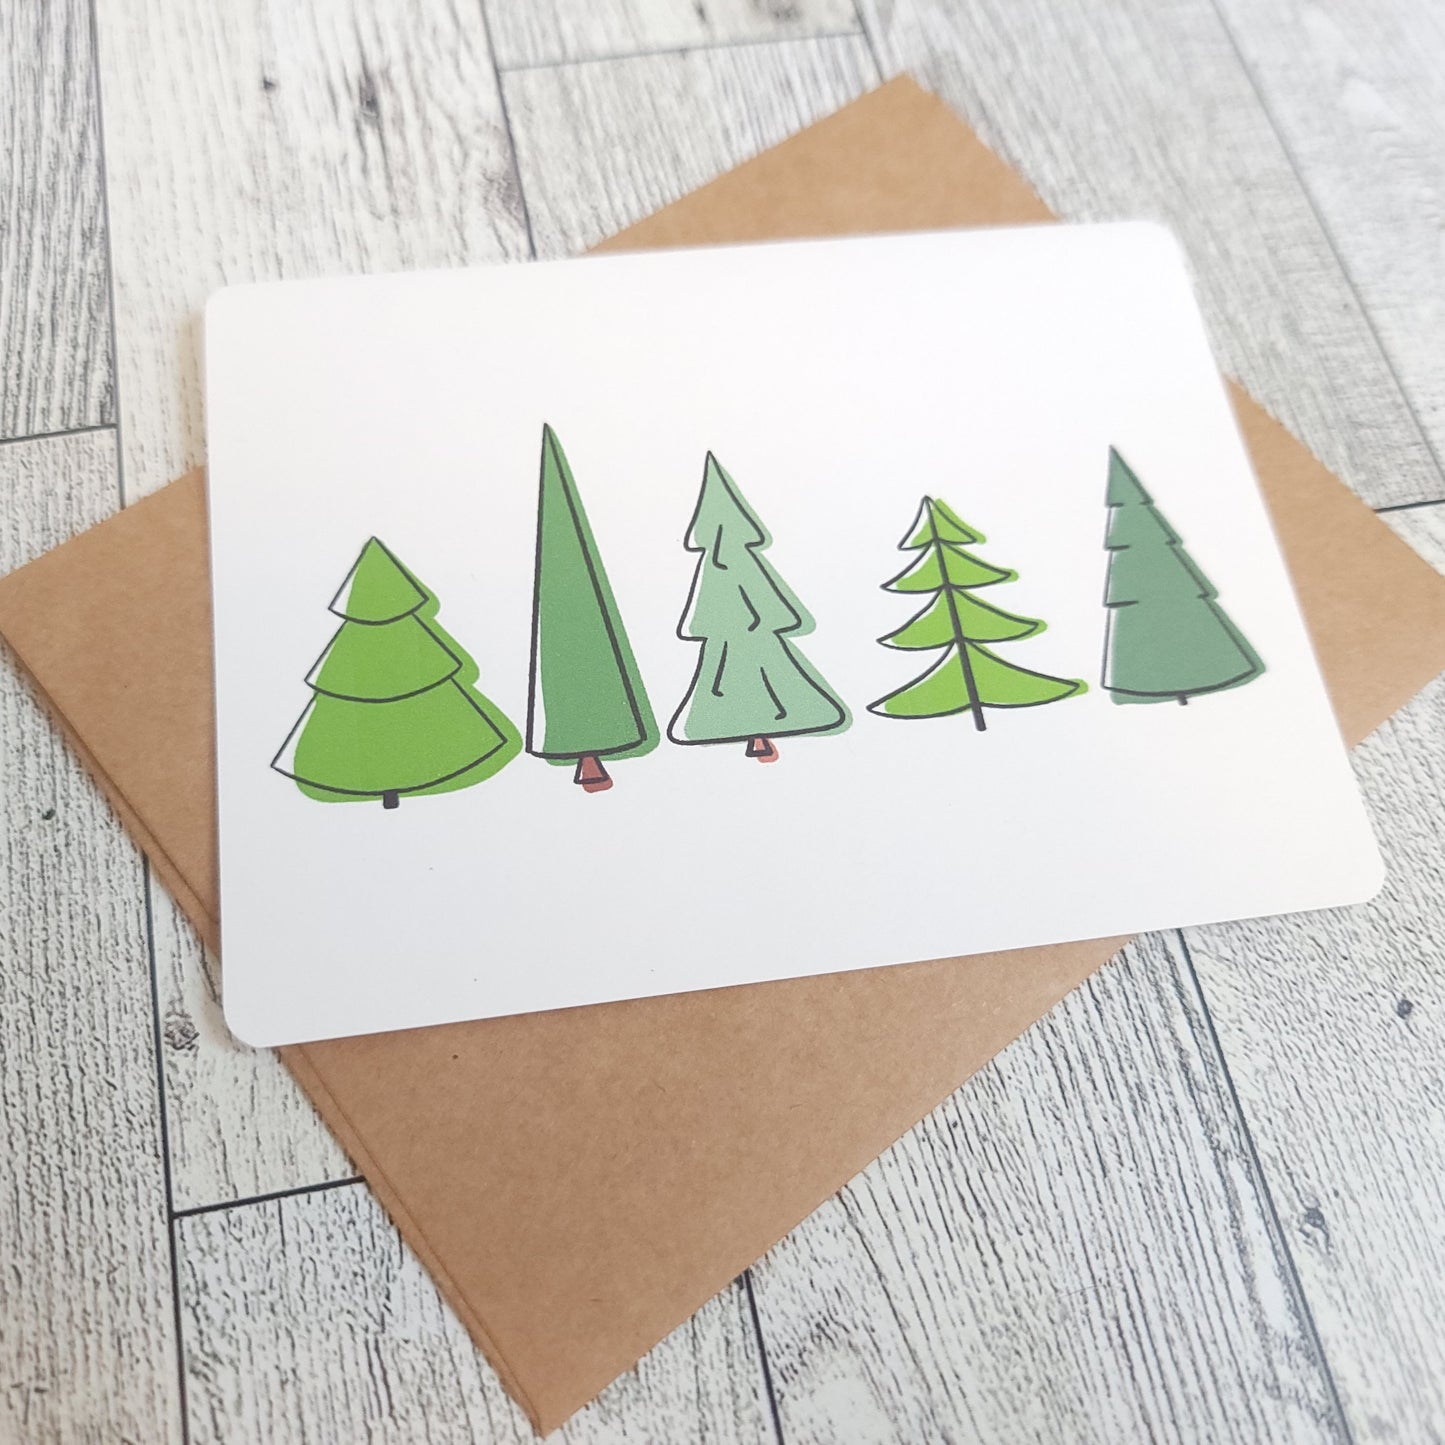 Pine Trees Handmade Greeting Card - Recycled Paper and Kraft Envelop - Overhead Shot 3